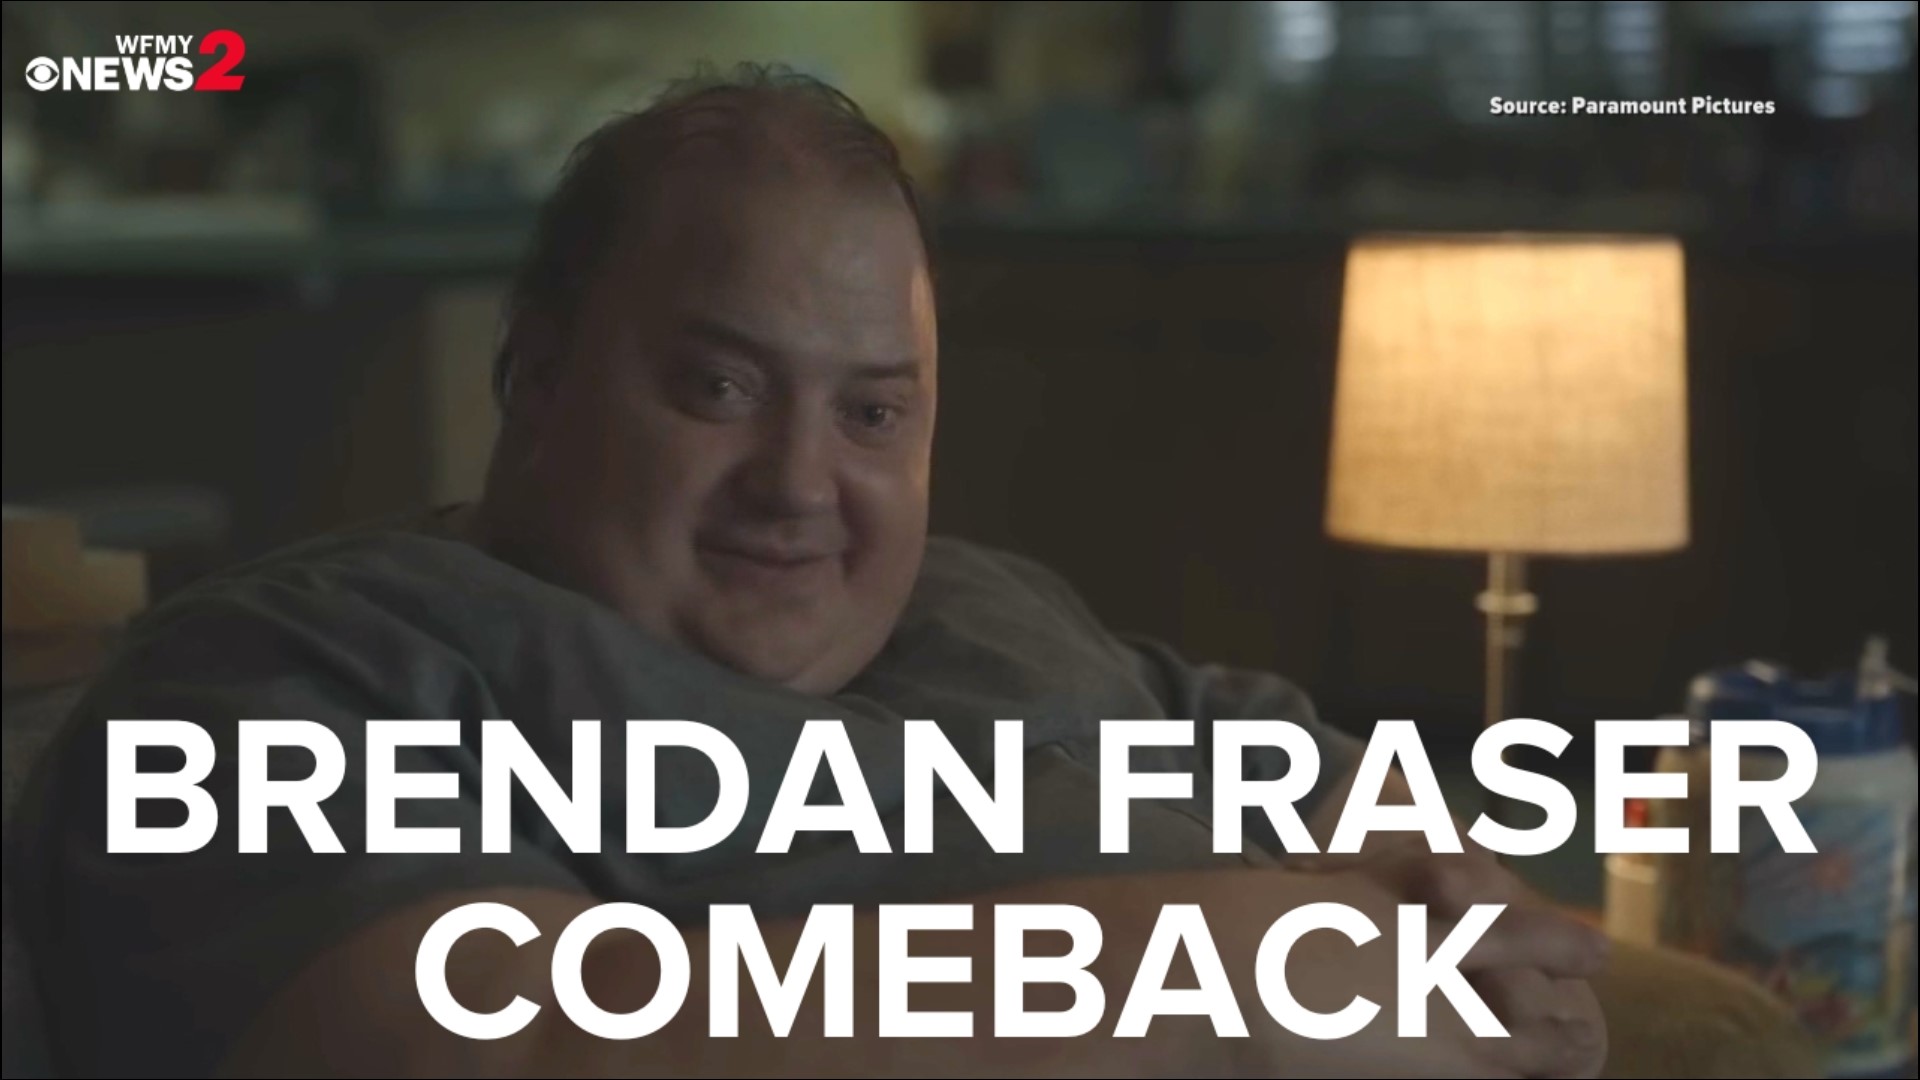 Expert Blanca Cobb uses Academy-award winning actor, Brendan Fraser as an example of how we can all make comebacks.